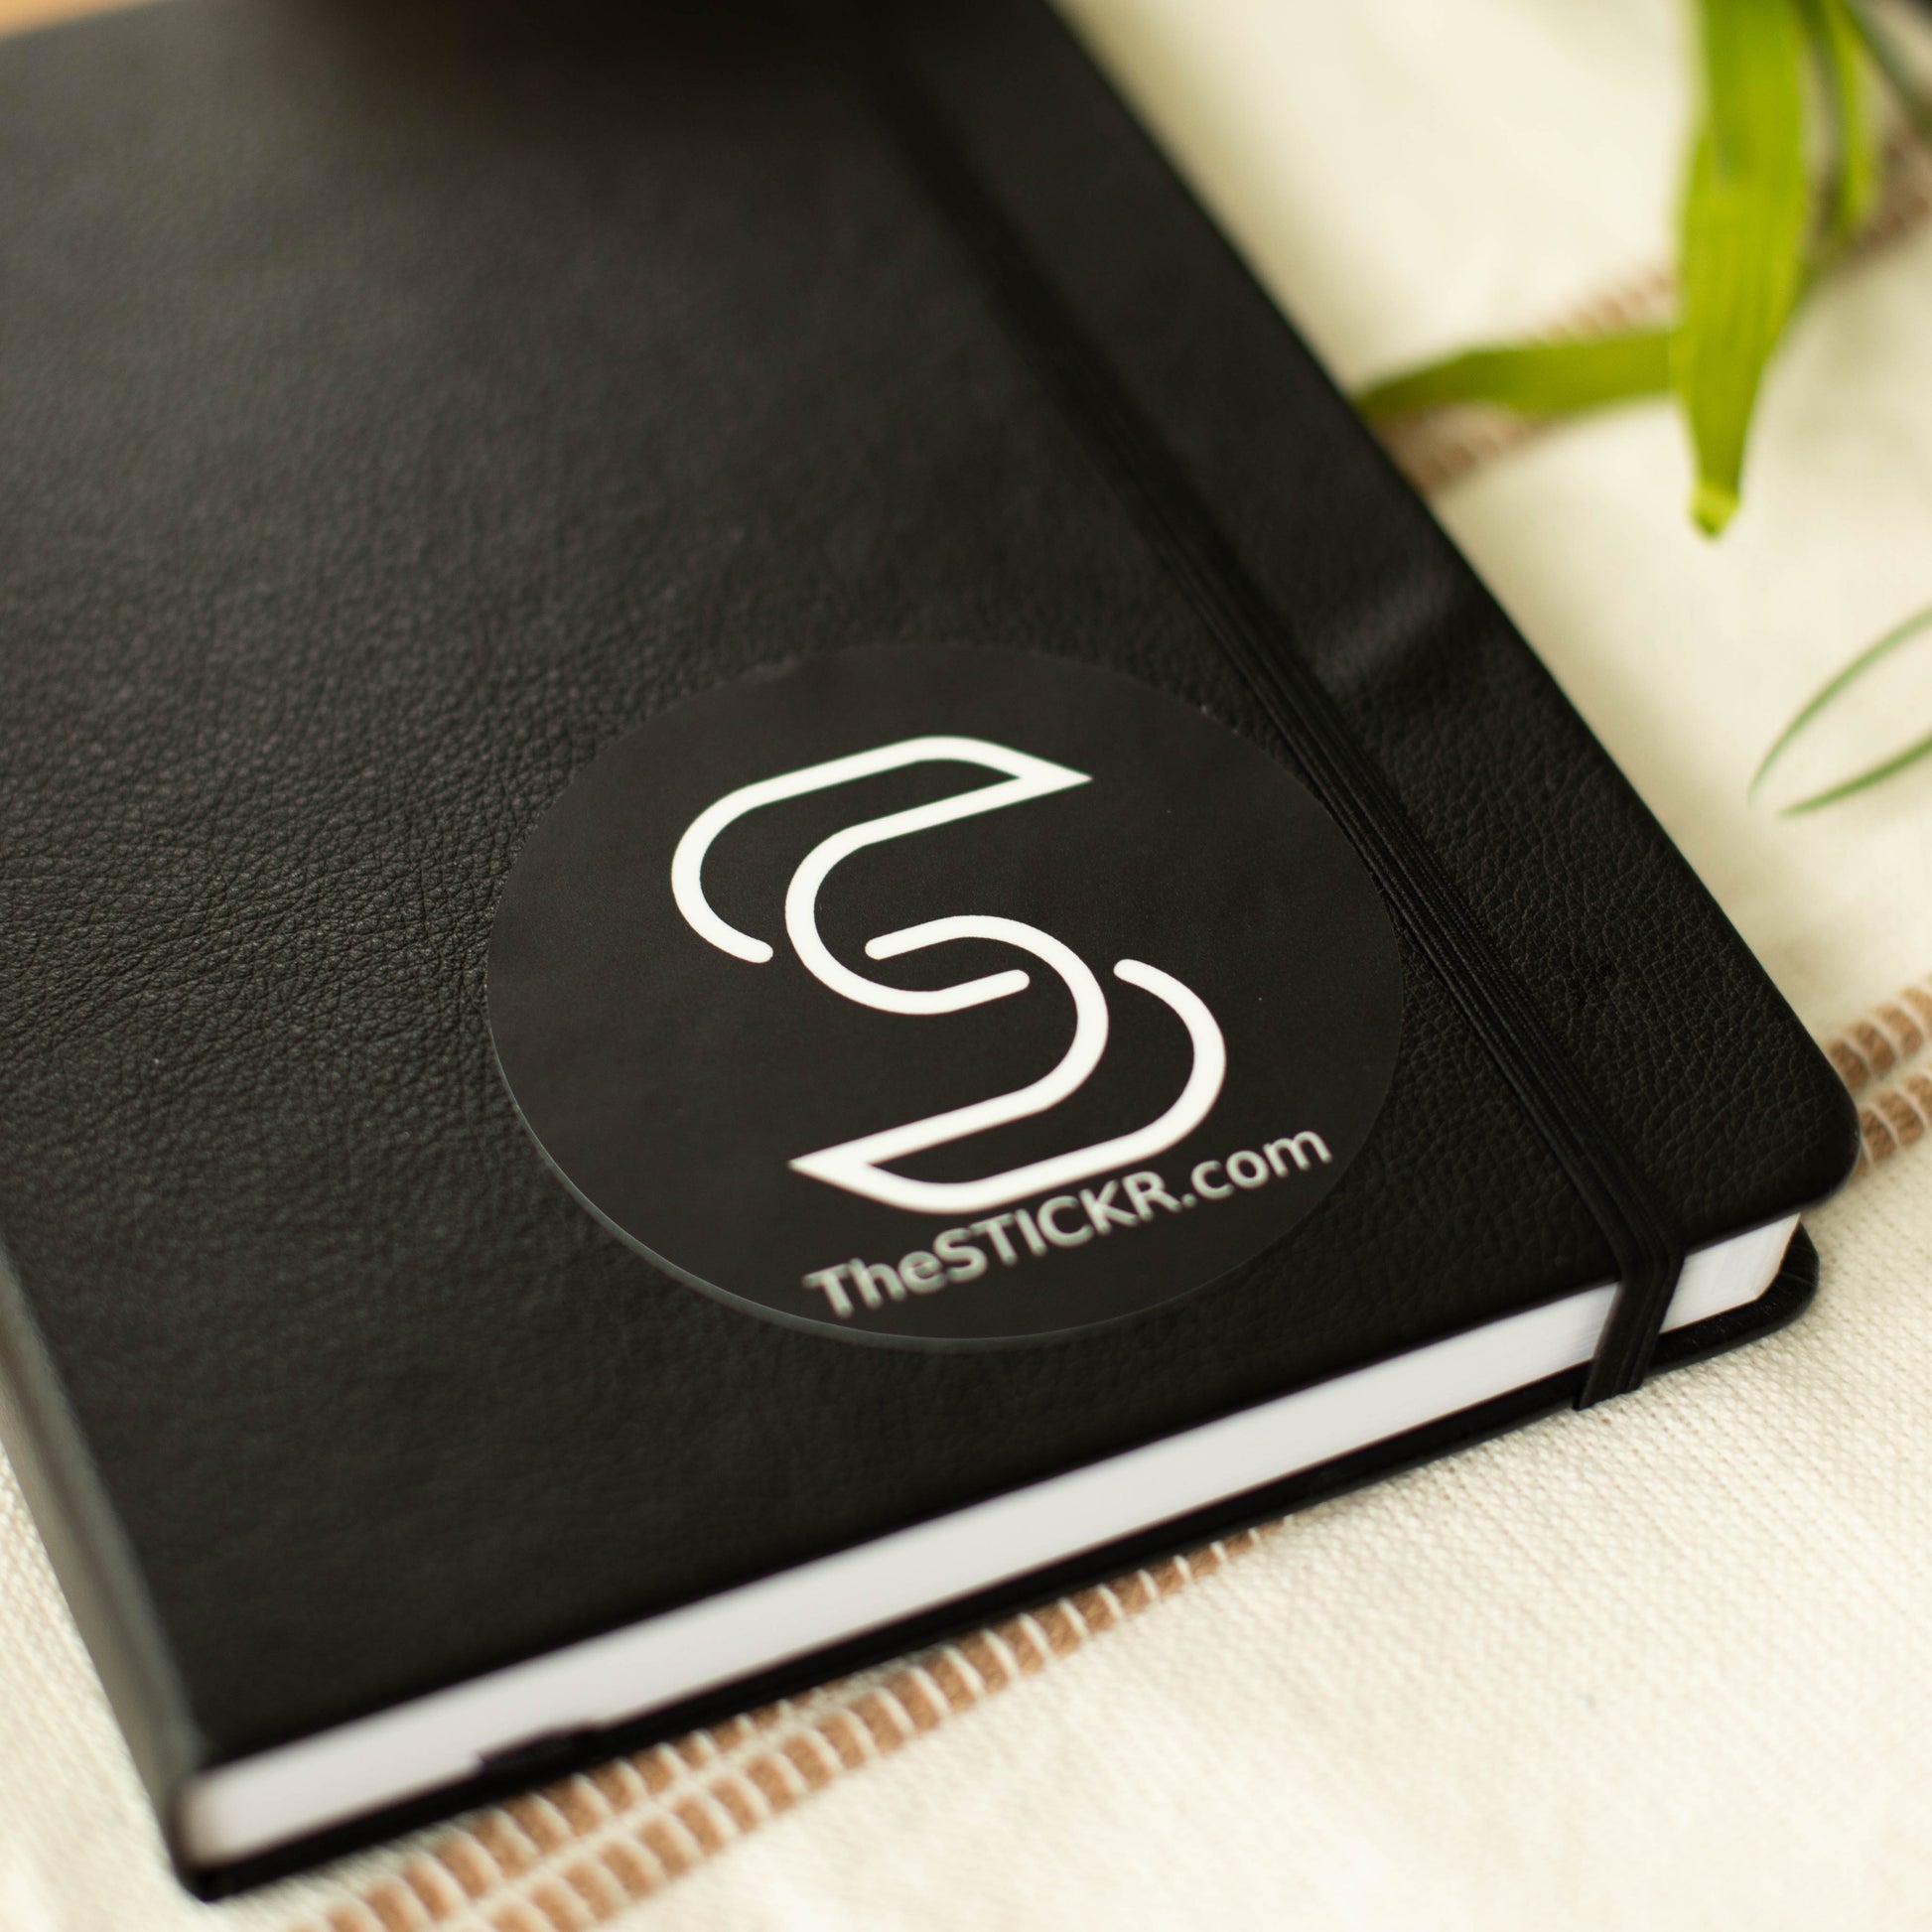 A black circular vinyl sticker of the Stickr logo and website on a notebook